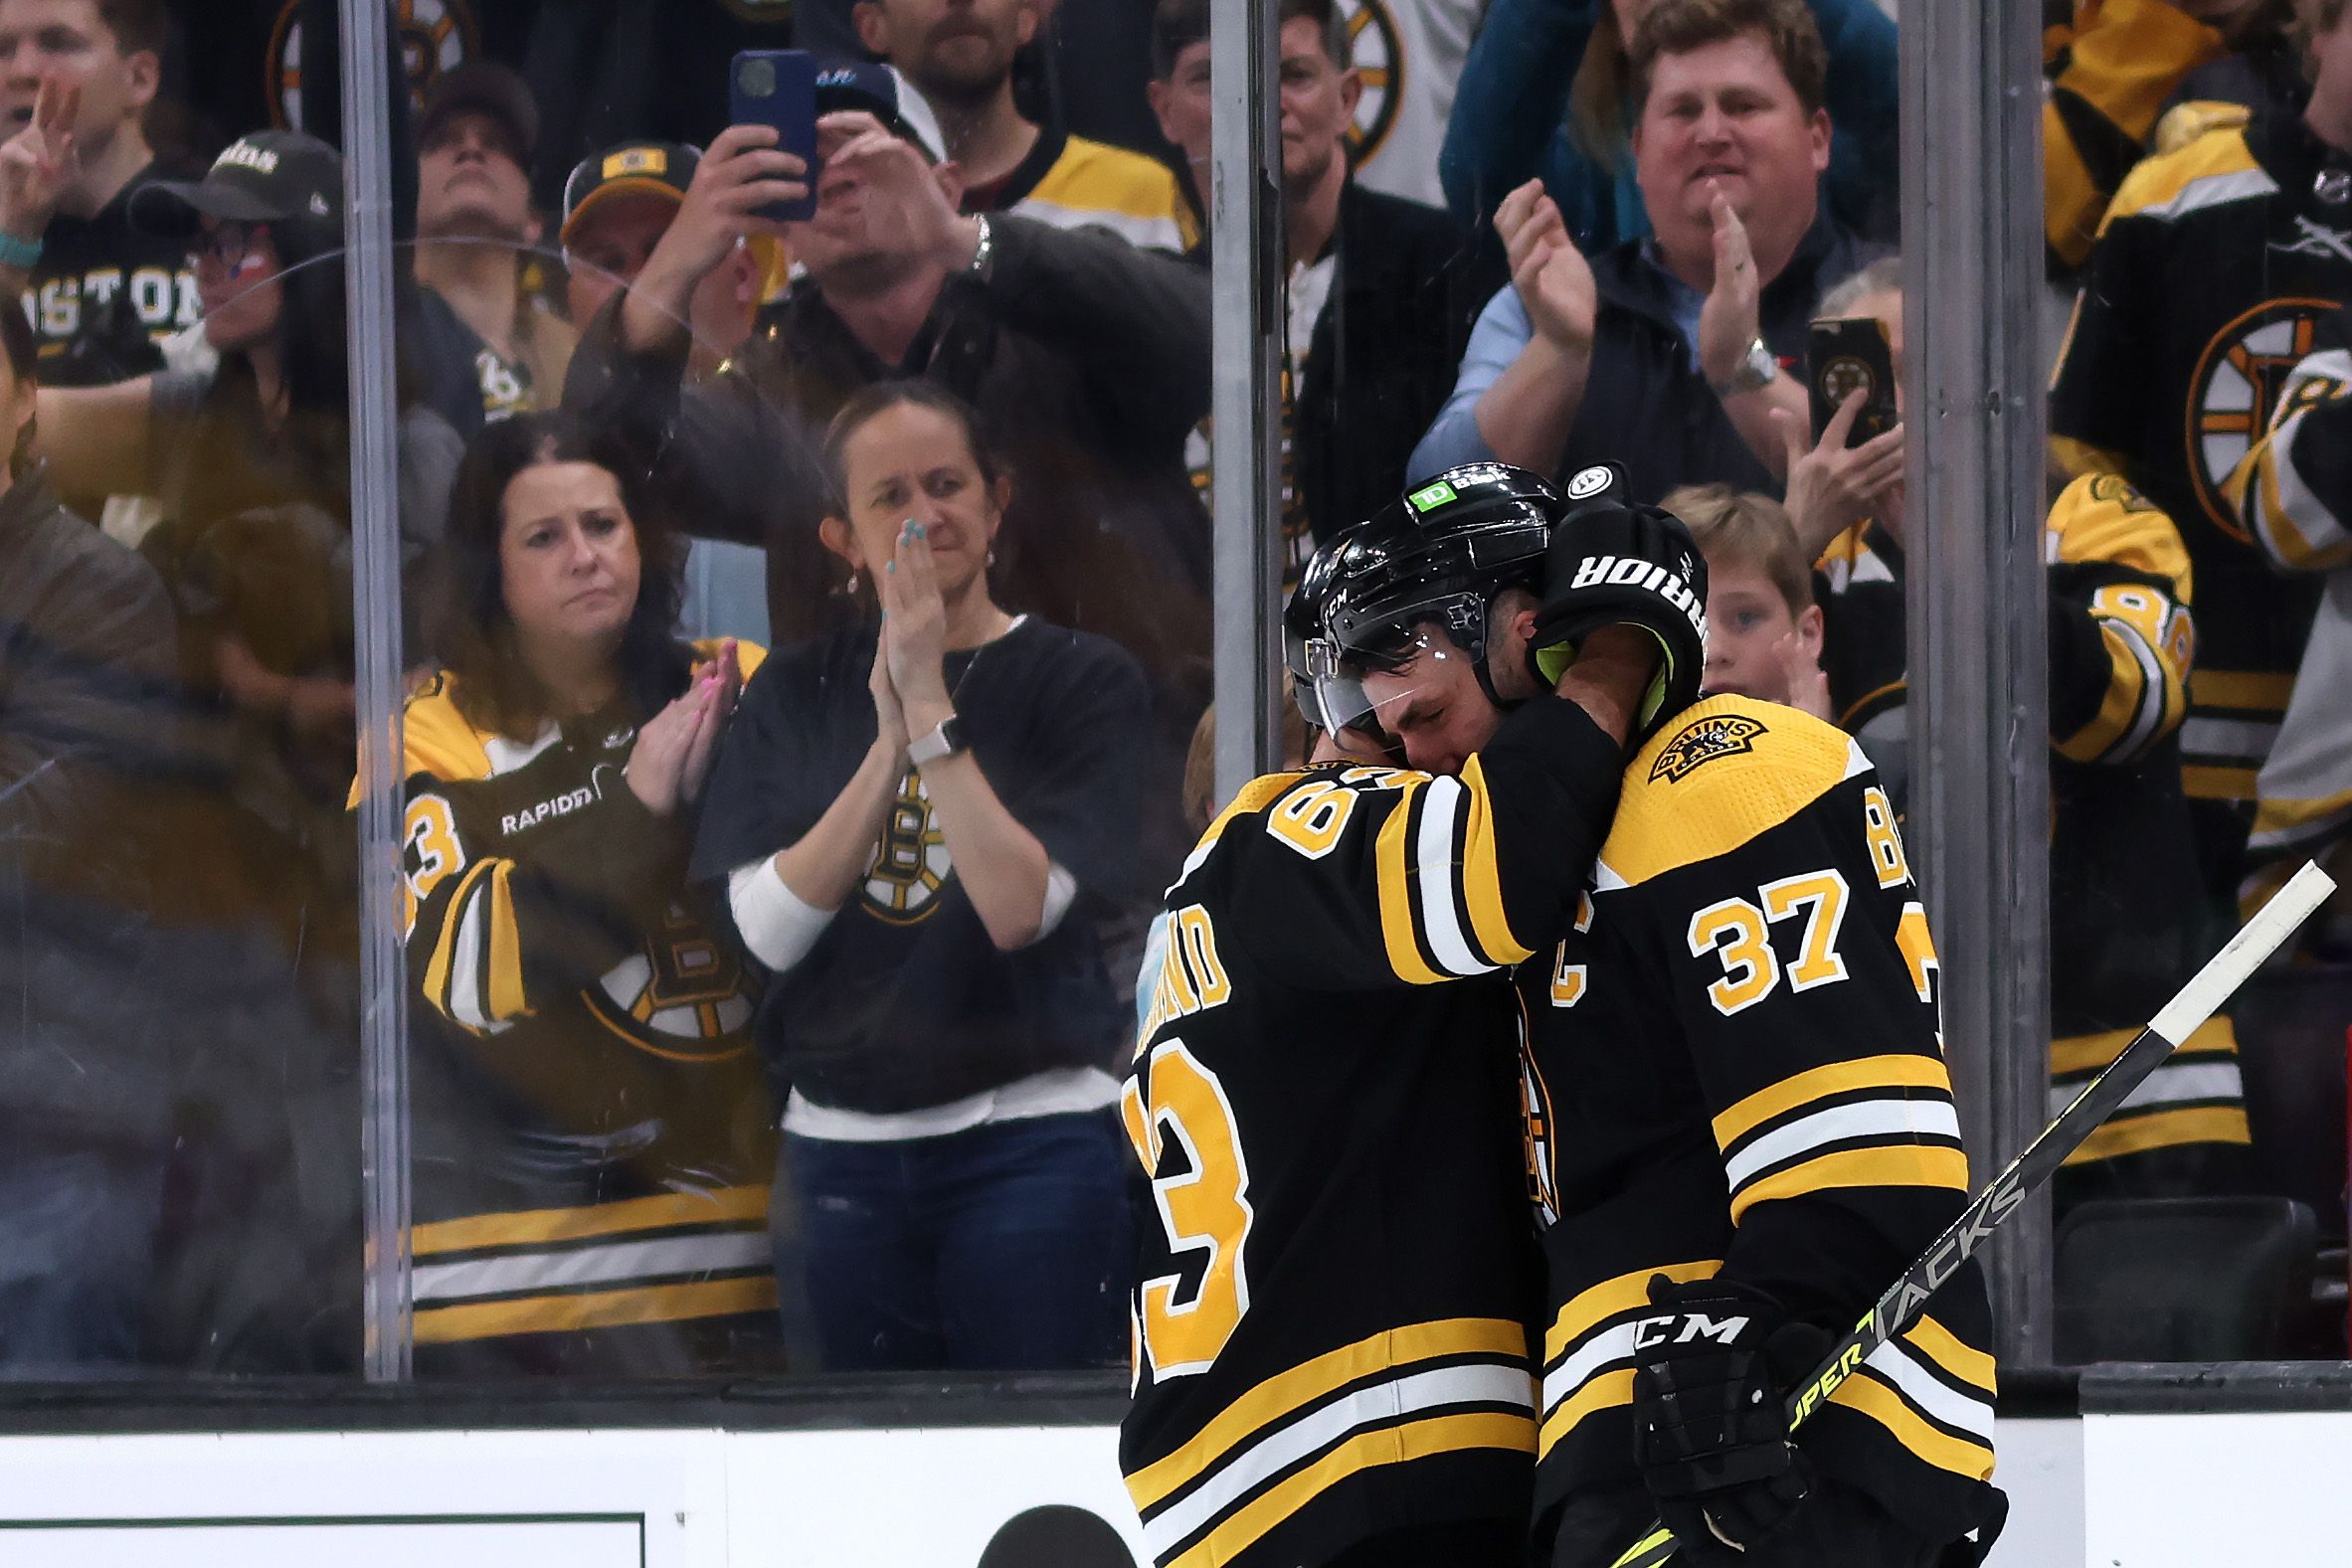 Patrice Bergeron #37 of the Boston Bruins hugs Brad Marchand #63 before exiting the ice after Florida Panthers defeat the Bruins 4-3 in overtime of Game Seven of the First Round of the 2023 Stanley Cup Playoffs at TD Garden on April 30, 2023 in Boston, Massachusetts